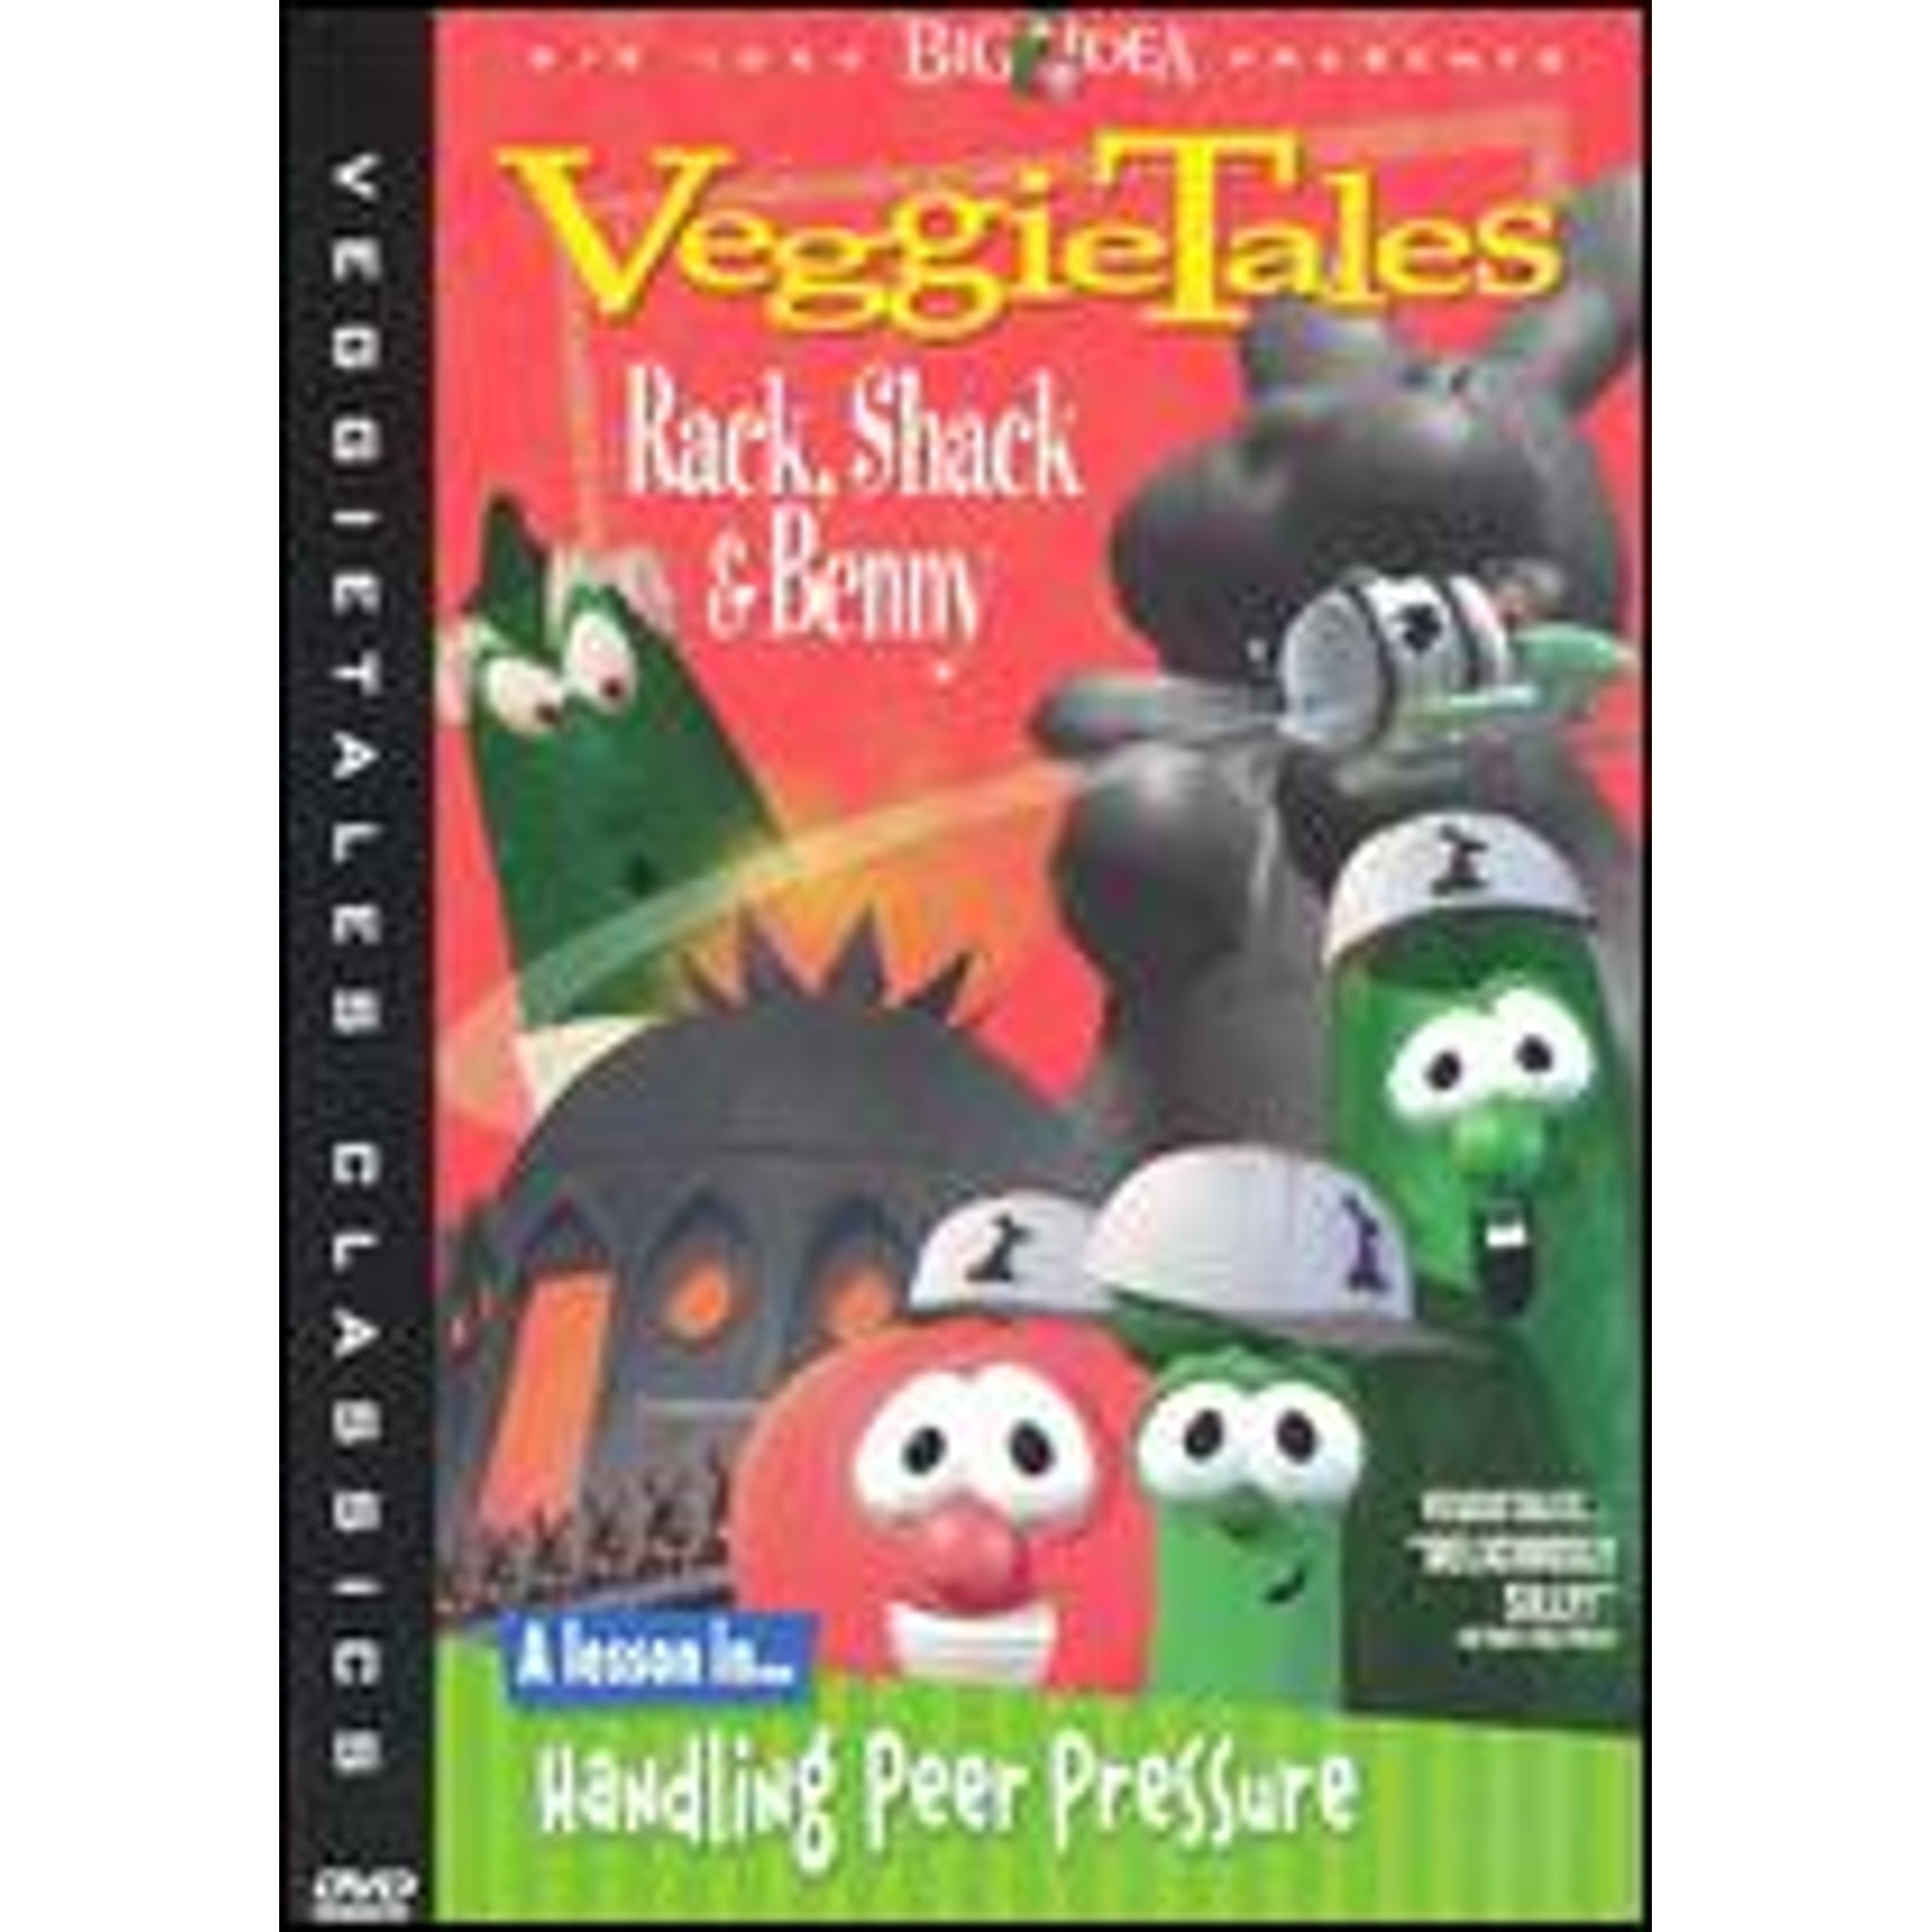 Veggie Tales: Rack, Shack and Benny (Pre-Owned DVD 0074645875095 ...